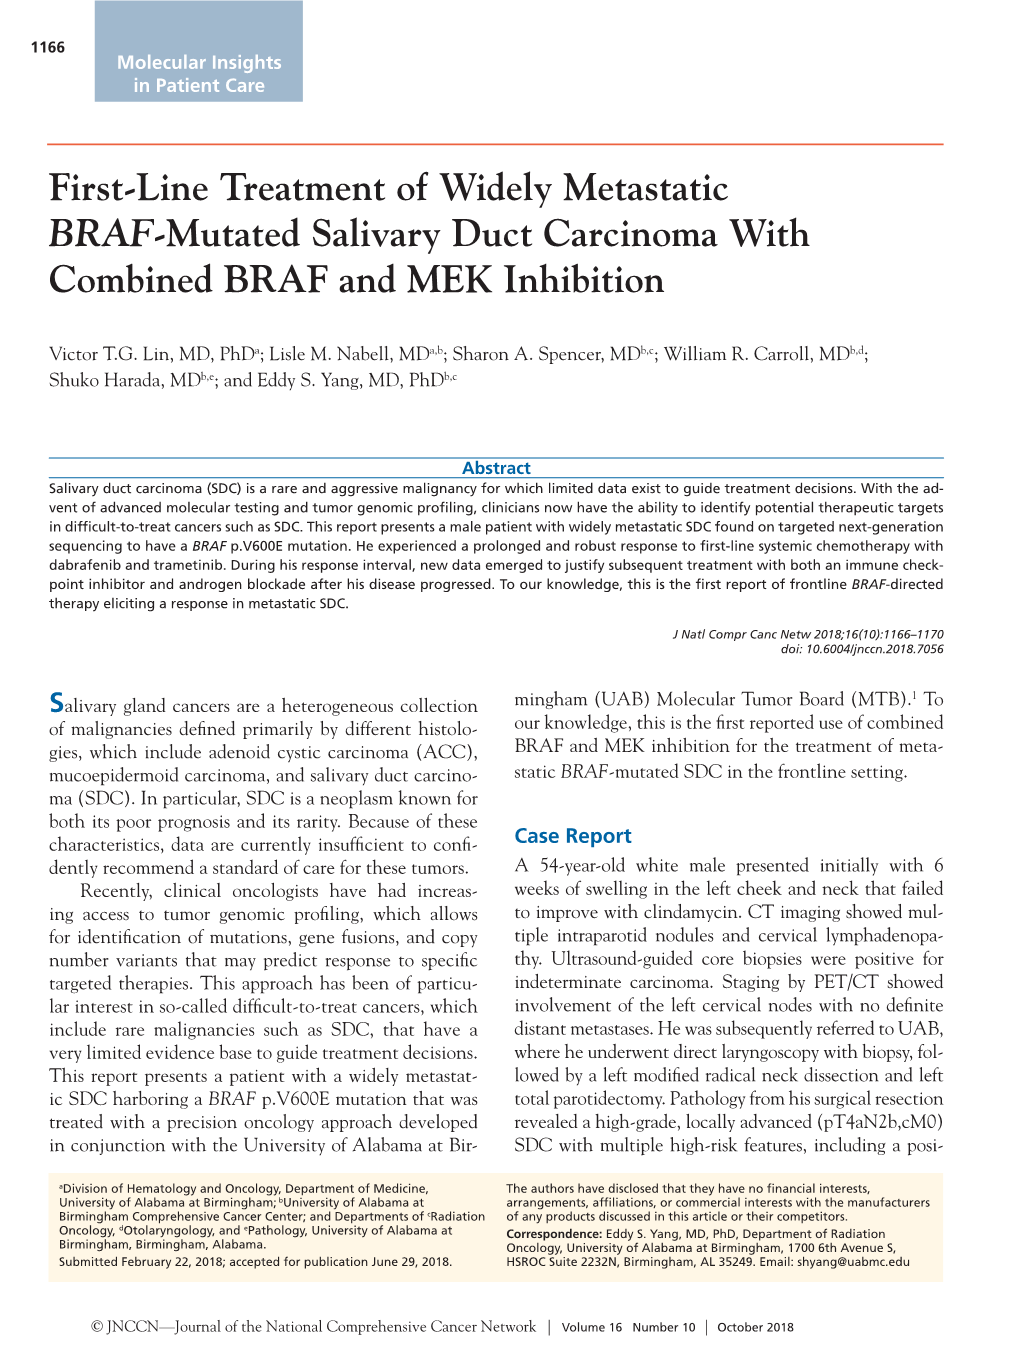 First-Line Treatment of Widely Metastatic BRAF-Mutated Salivary Duct Carcinoma with Combined BRAF and MEK Inhibition